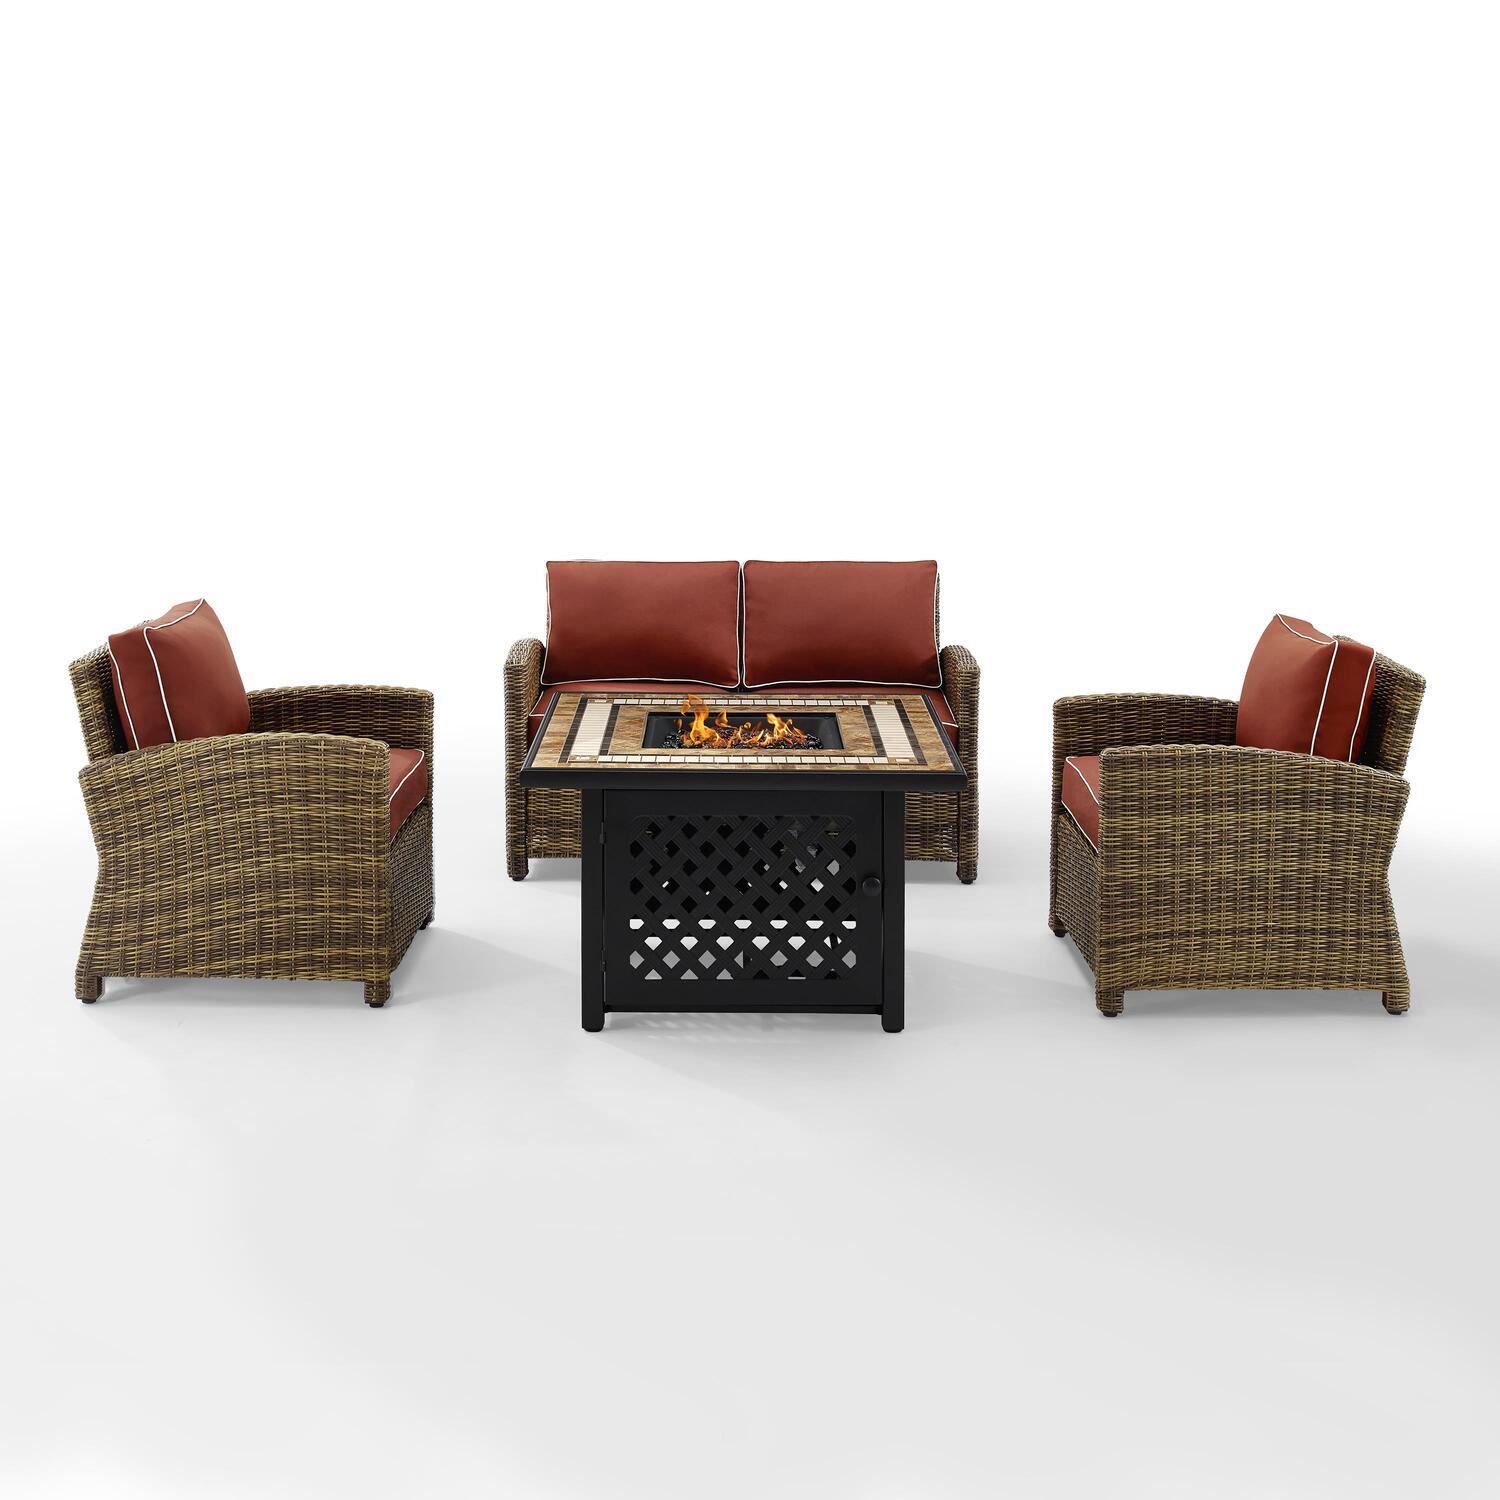 Crosley Furniture Bradenton 4 Piece Patio Fabric Fire Pit Sofa Set in Brown/Red - image 1 of 9